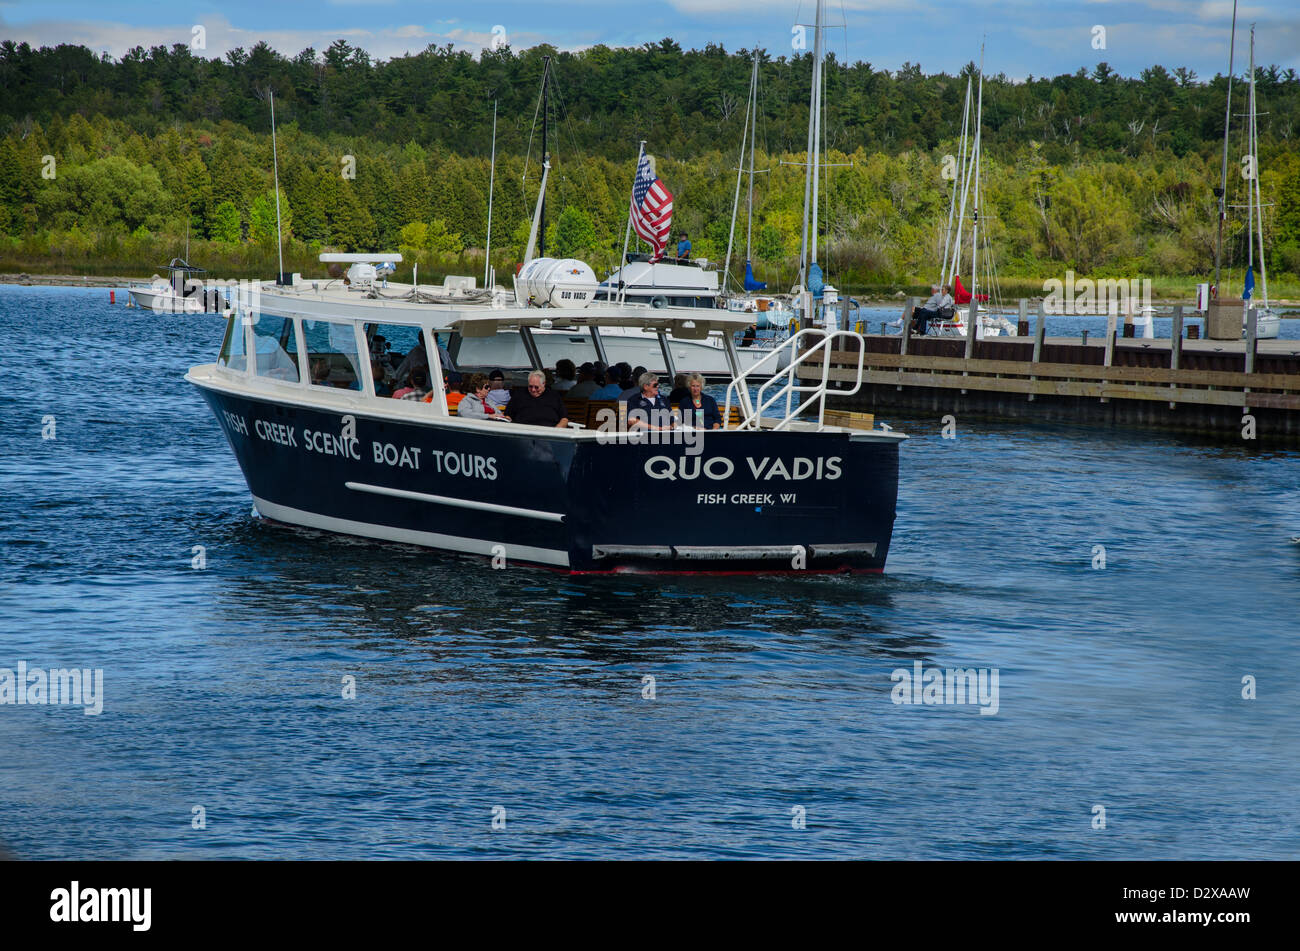 Scenic Boat Tours of Green Bay in the Door County town of Fish Creek Wisconsin Stock Photo